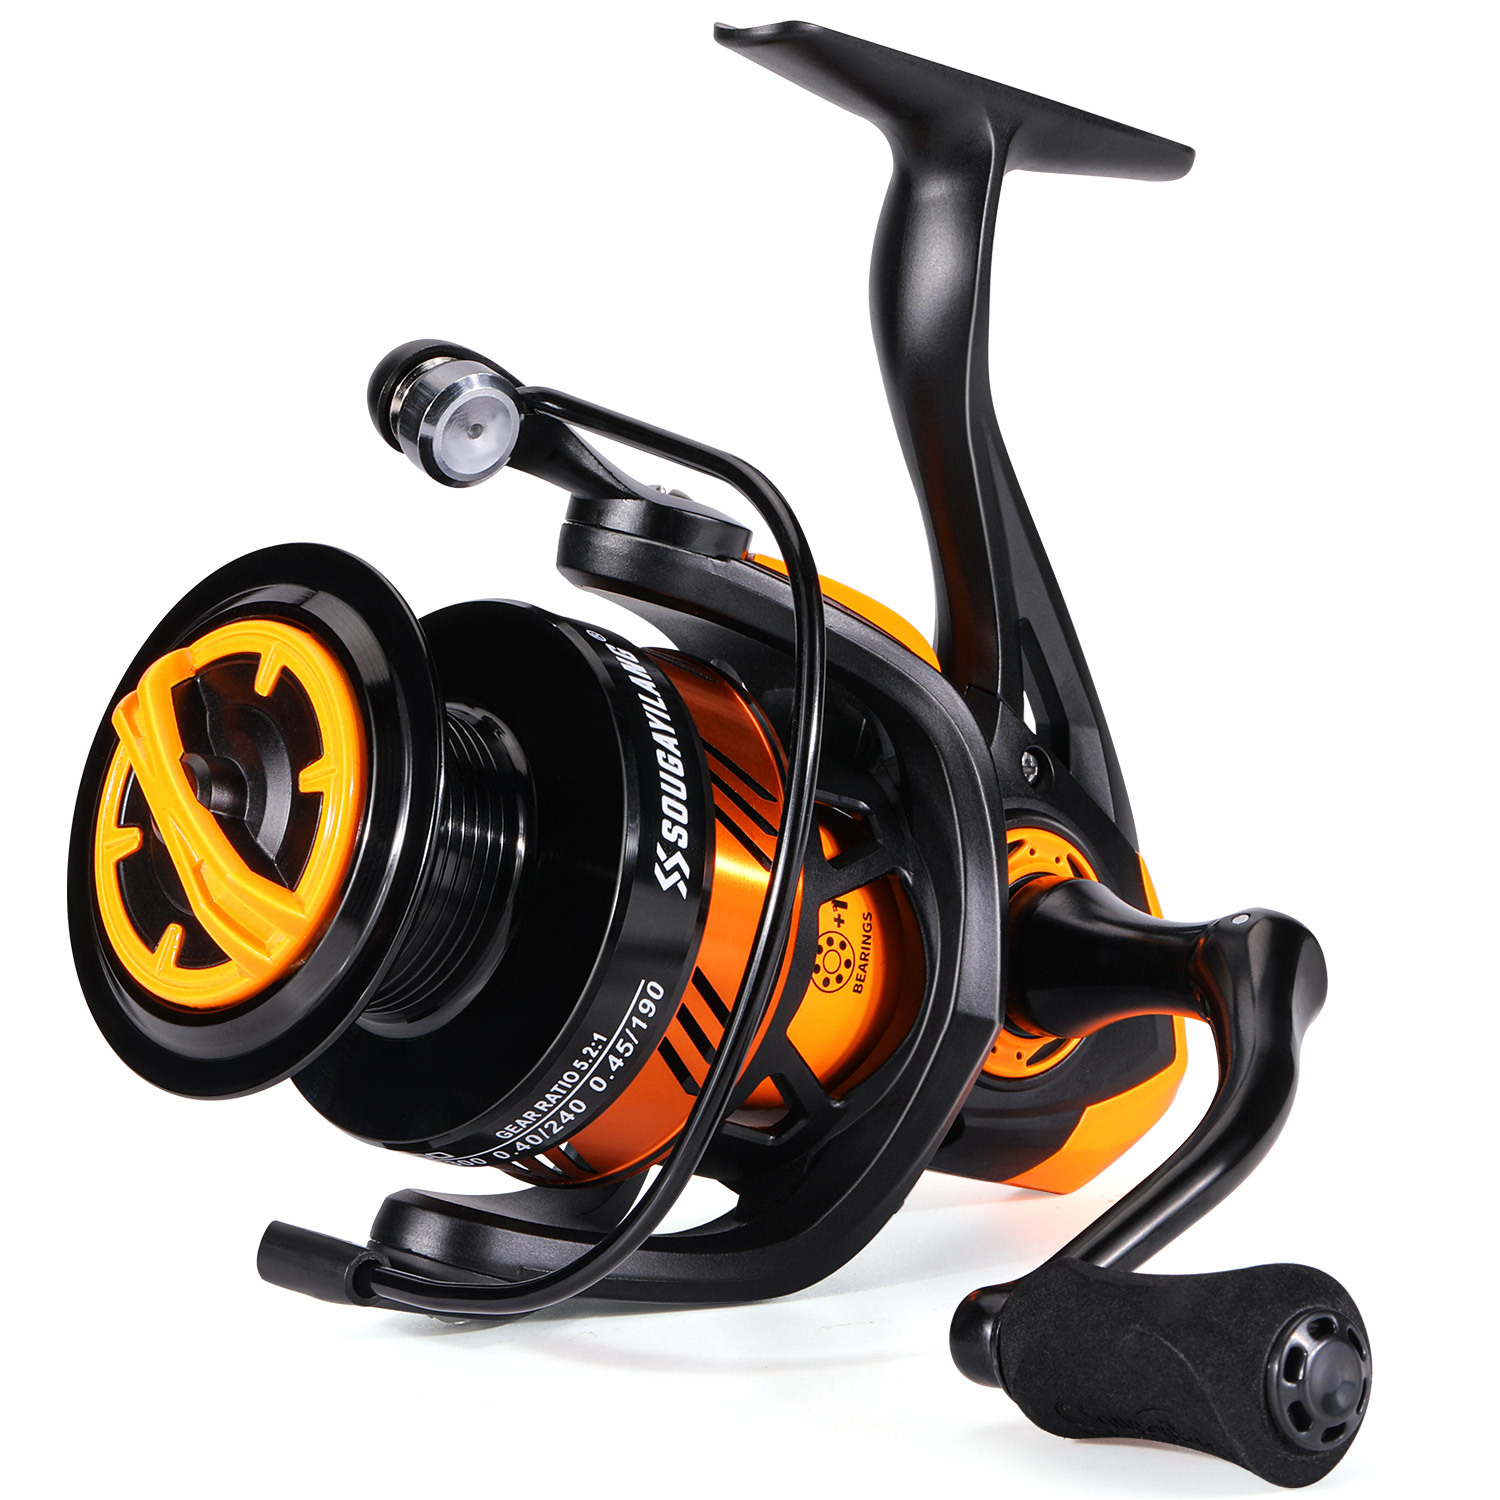 Sougayilang Spinning Fishing Reel - 11+1 BB, 5.2:1 High Speed Gear Ratio,  Ultra-Smooth Lightweight Design - Ideal for Bass, Trout, Freshwater and Salt